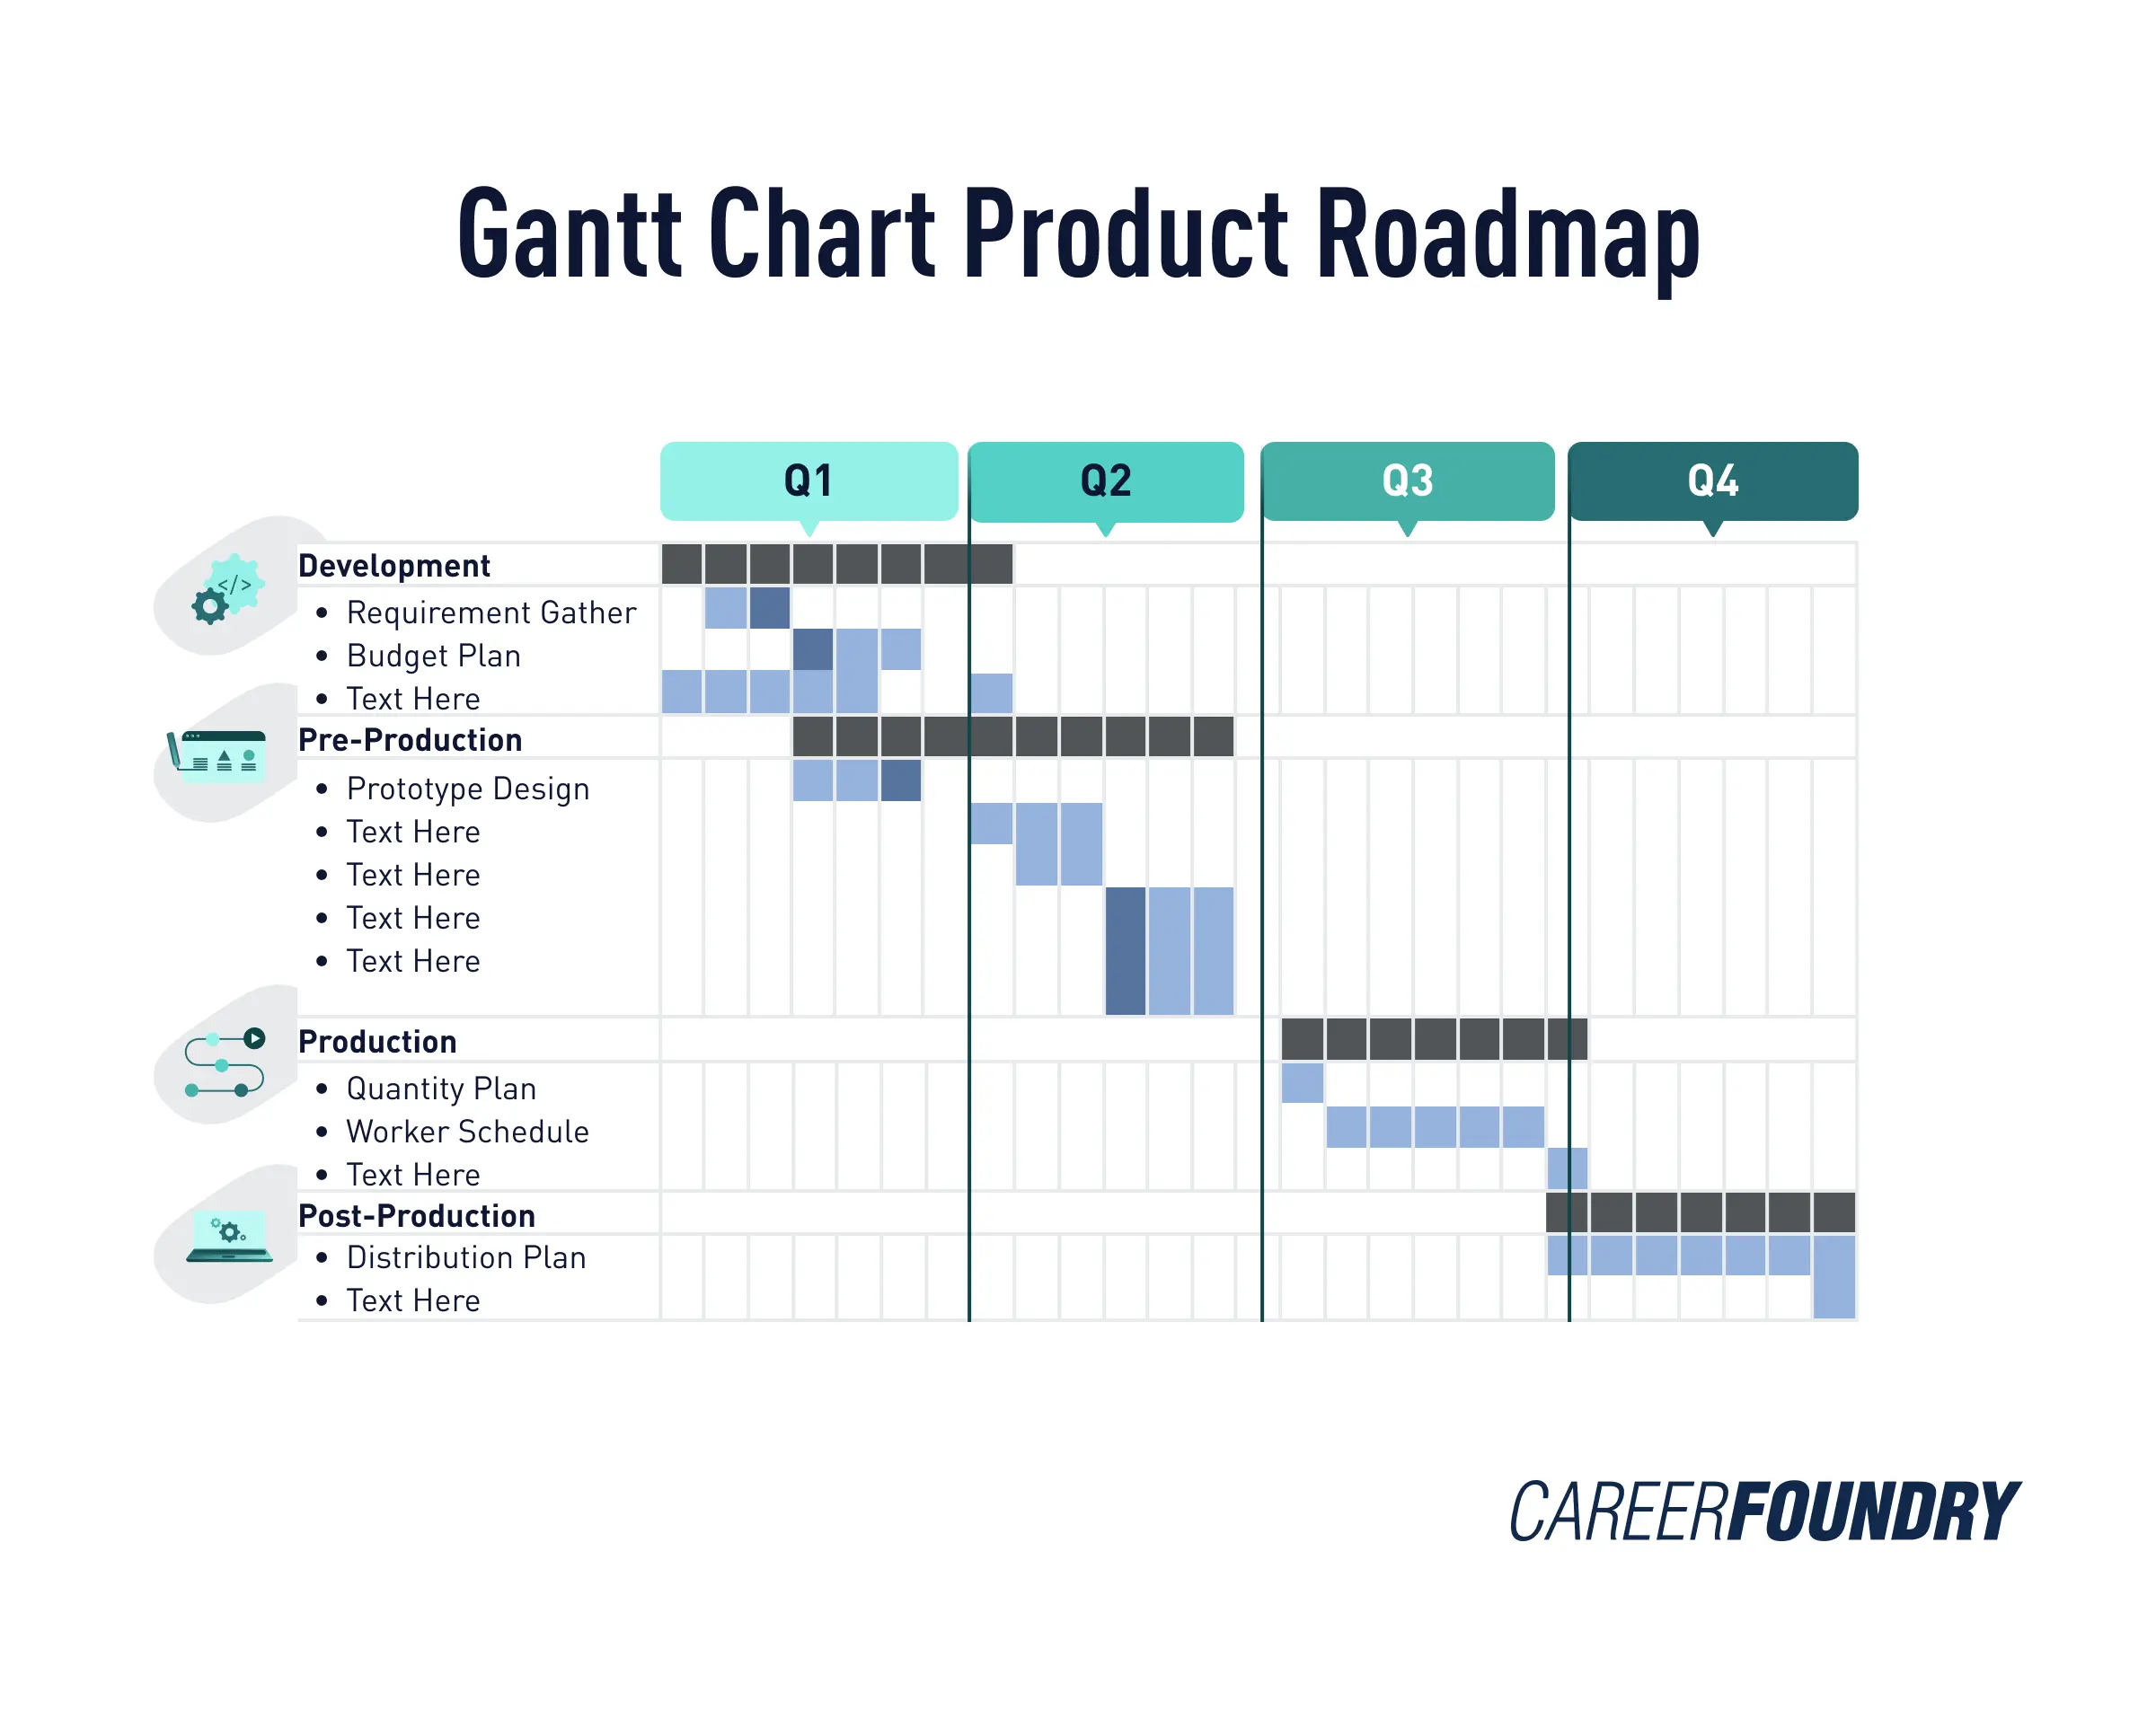 An example of a Gantt chart for a product roadmap.